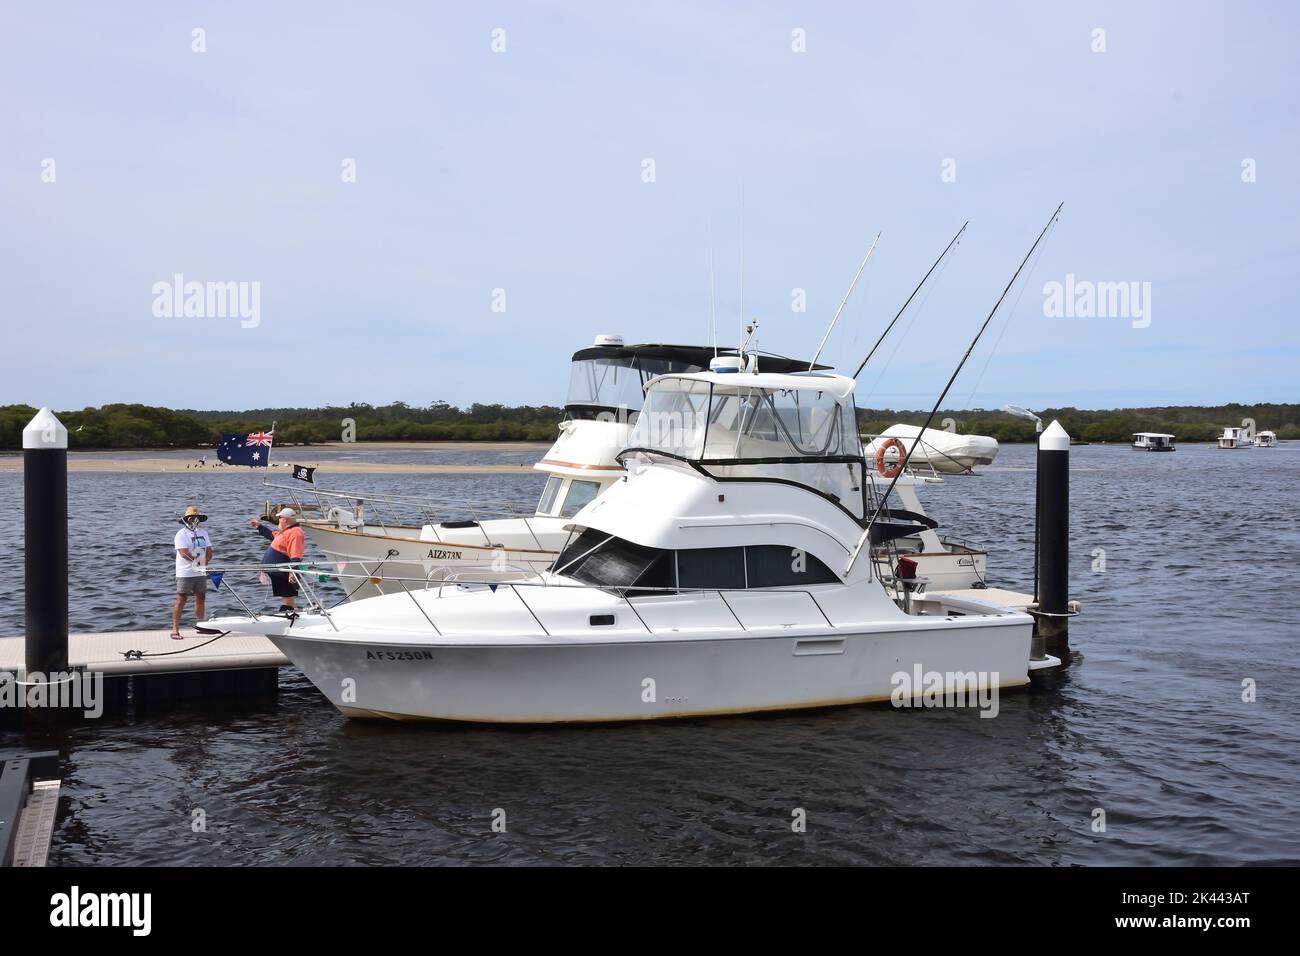 Fishing boats moored in the Myall River at Tea Gardens NSW Australia, Stock Photo